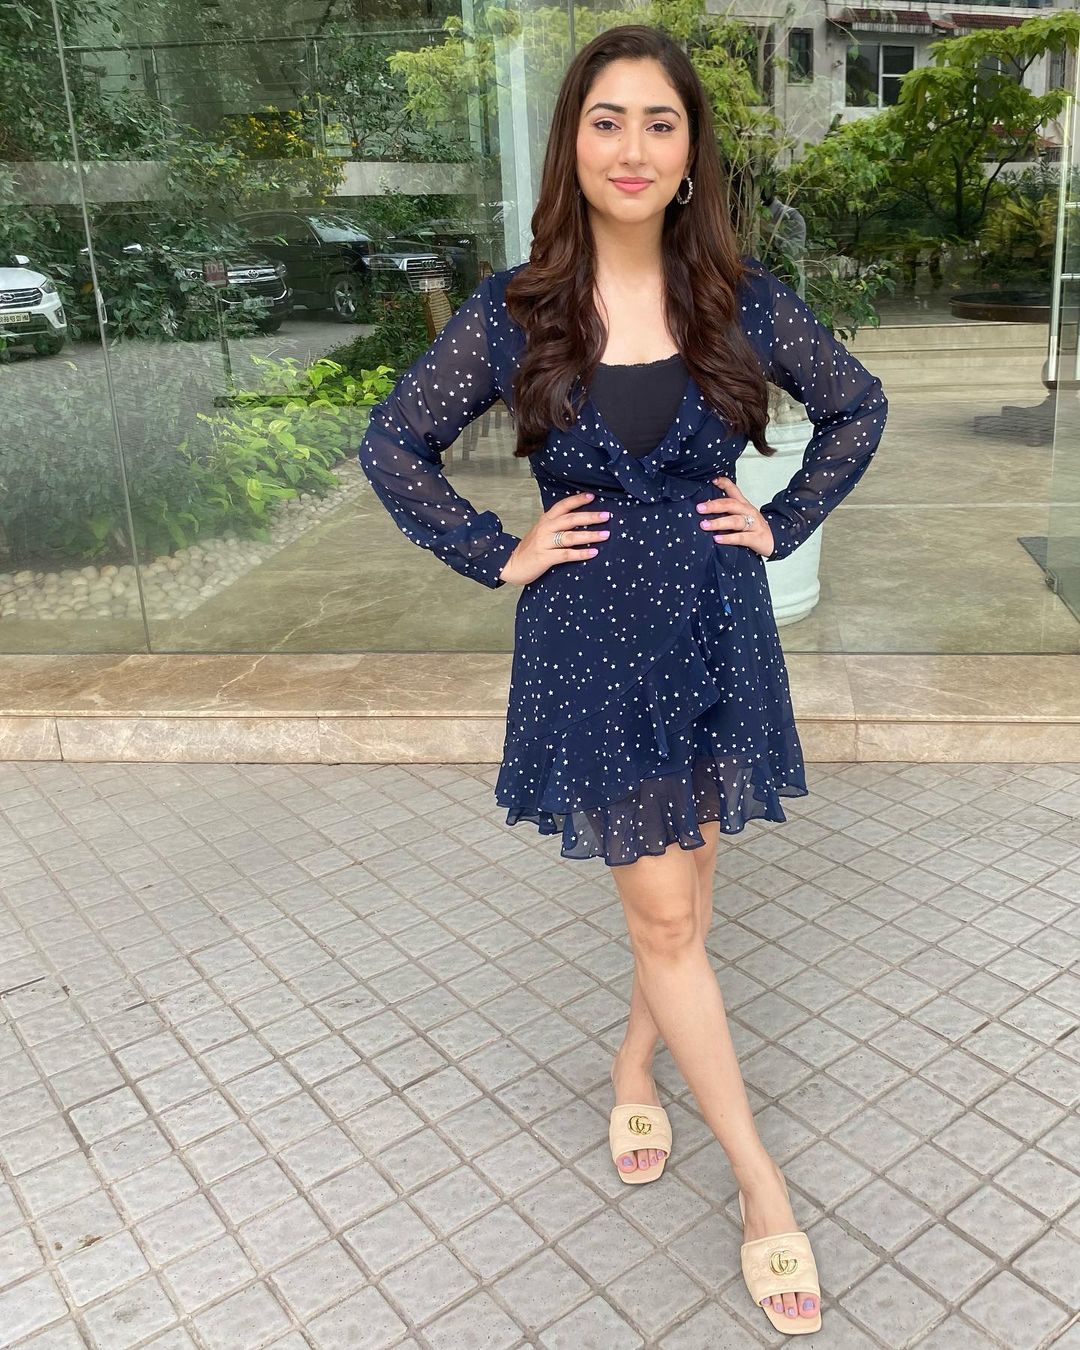 Disha Parmar Girly Look In Blue Mini Dress Outfit